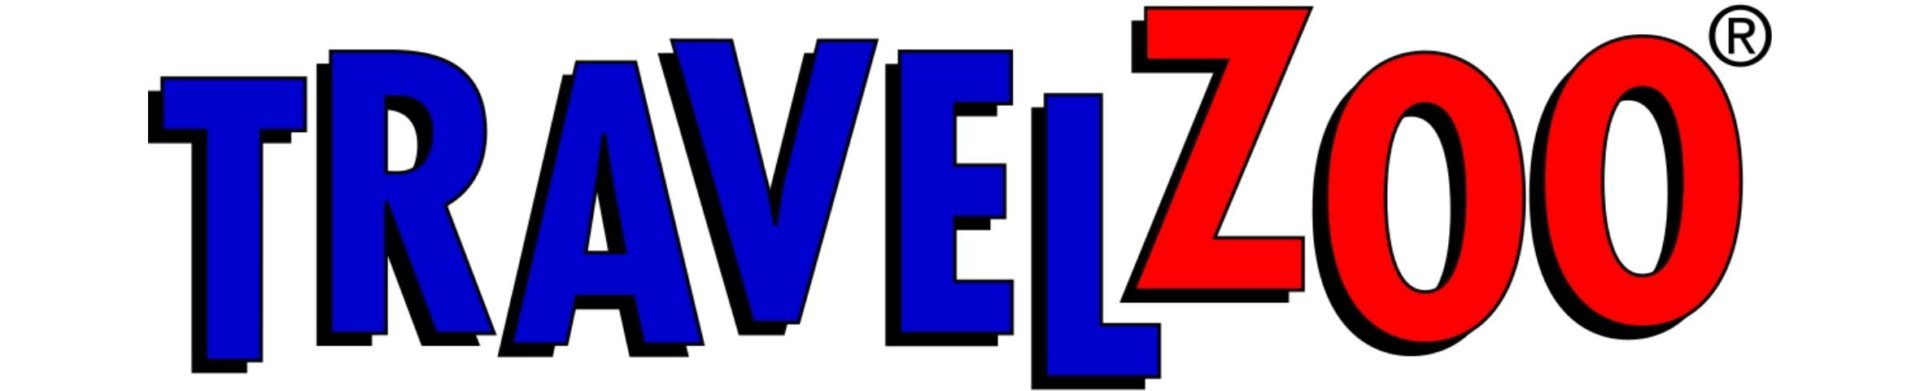 the TravelZoo logo in blue and red